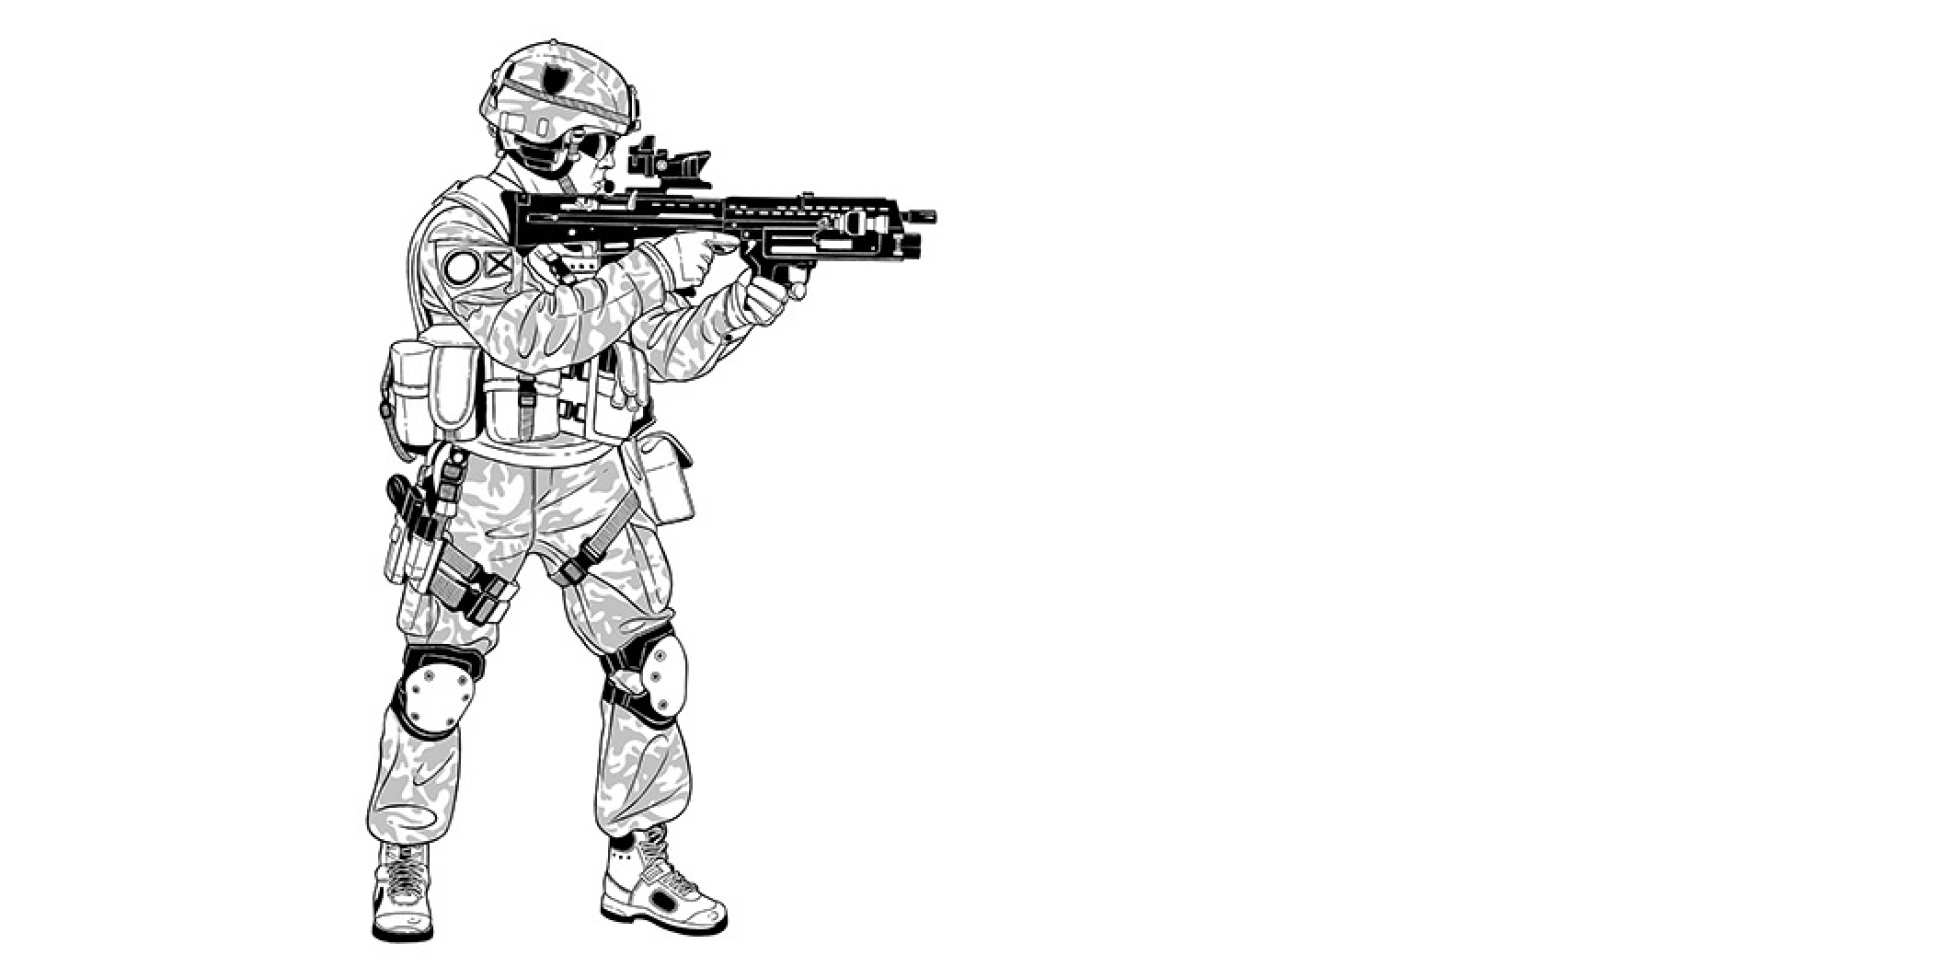 An illustration of a solider aiming a gun